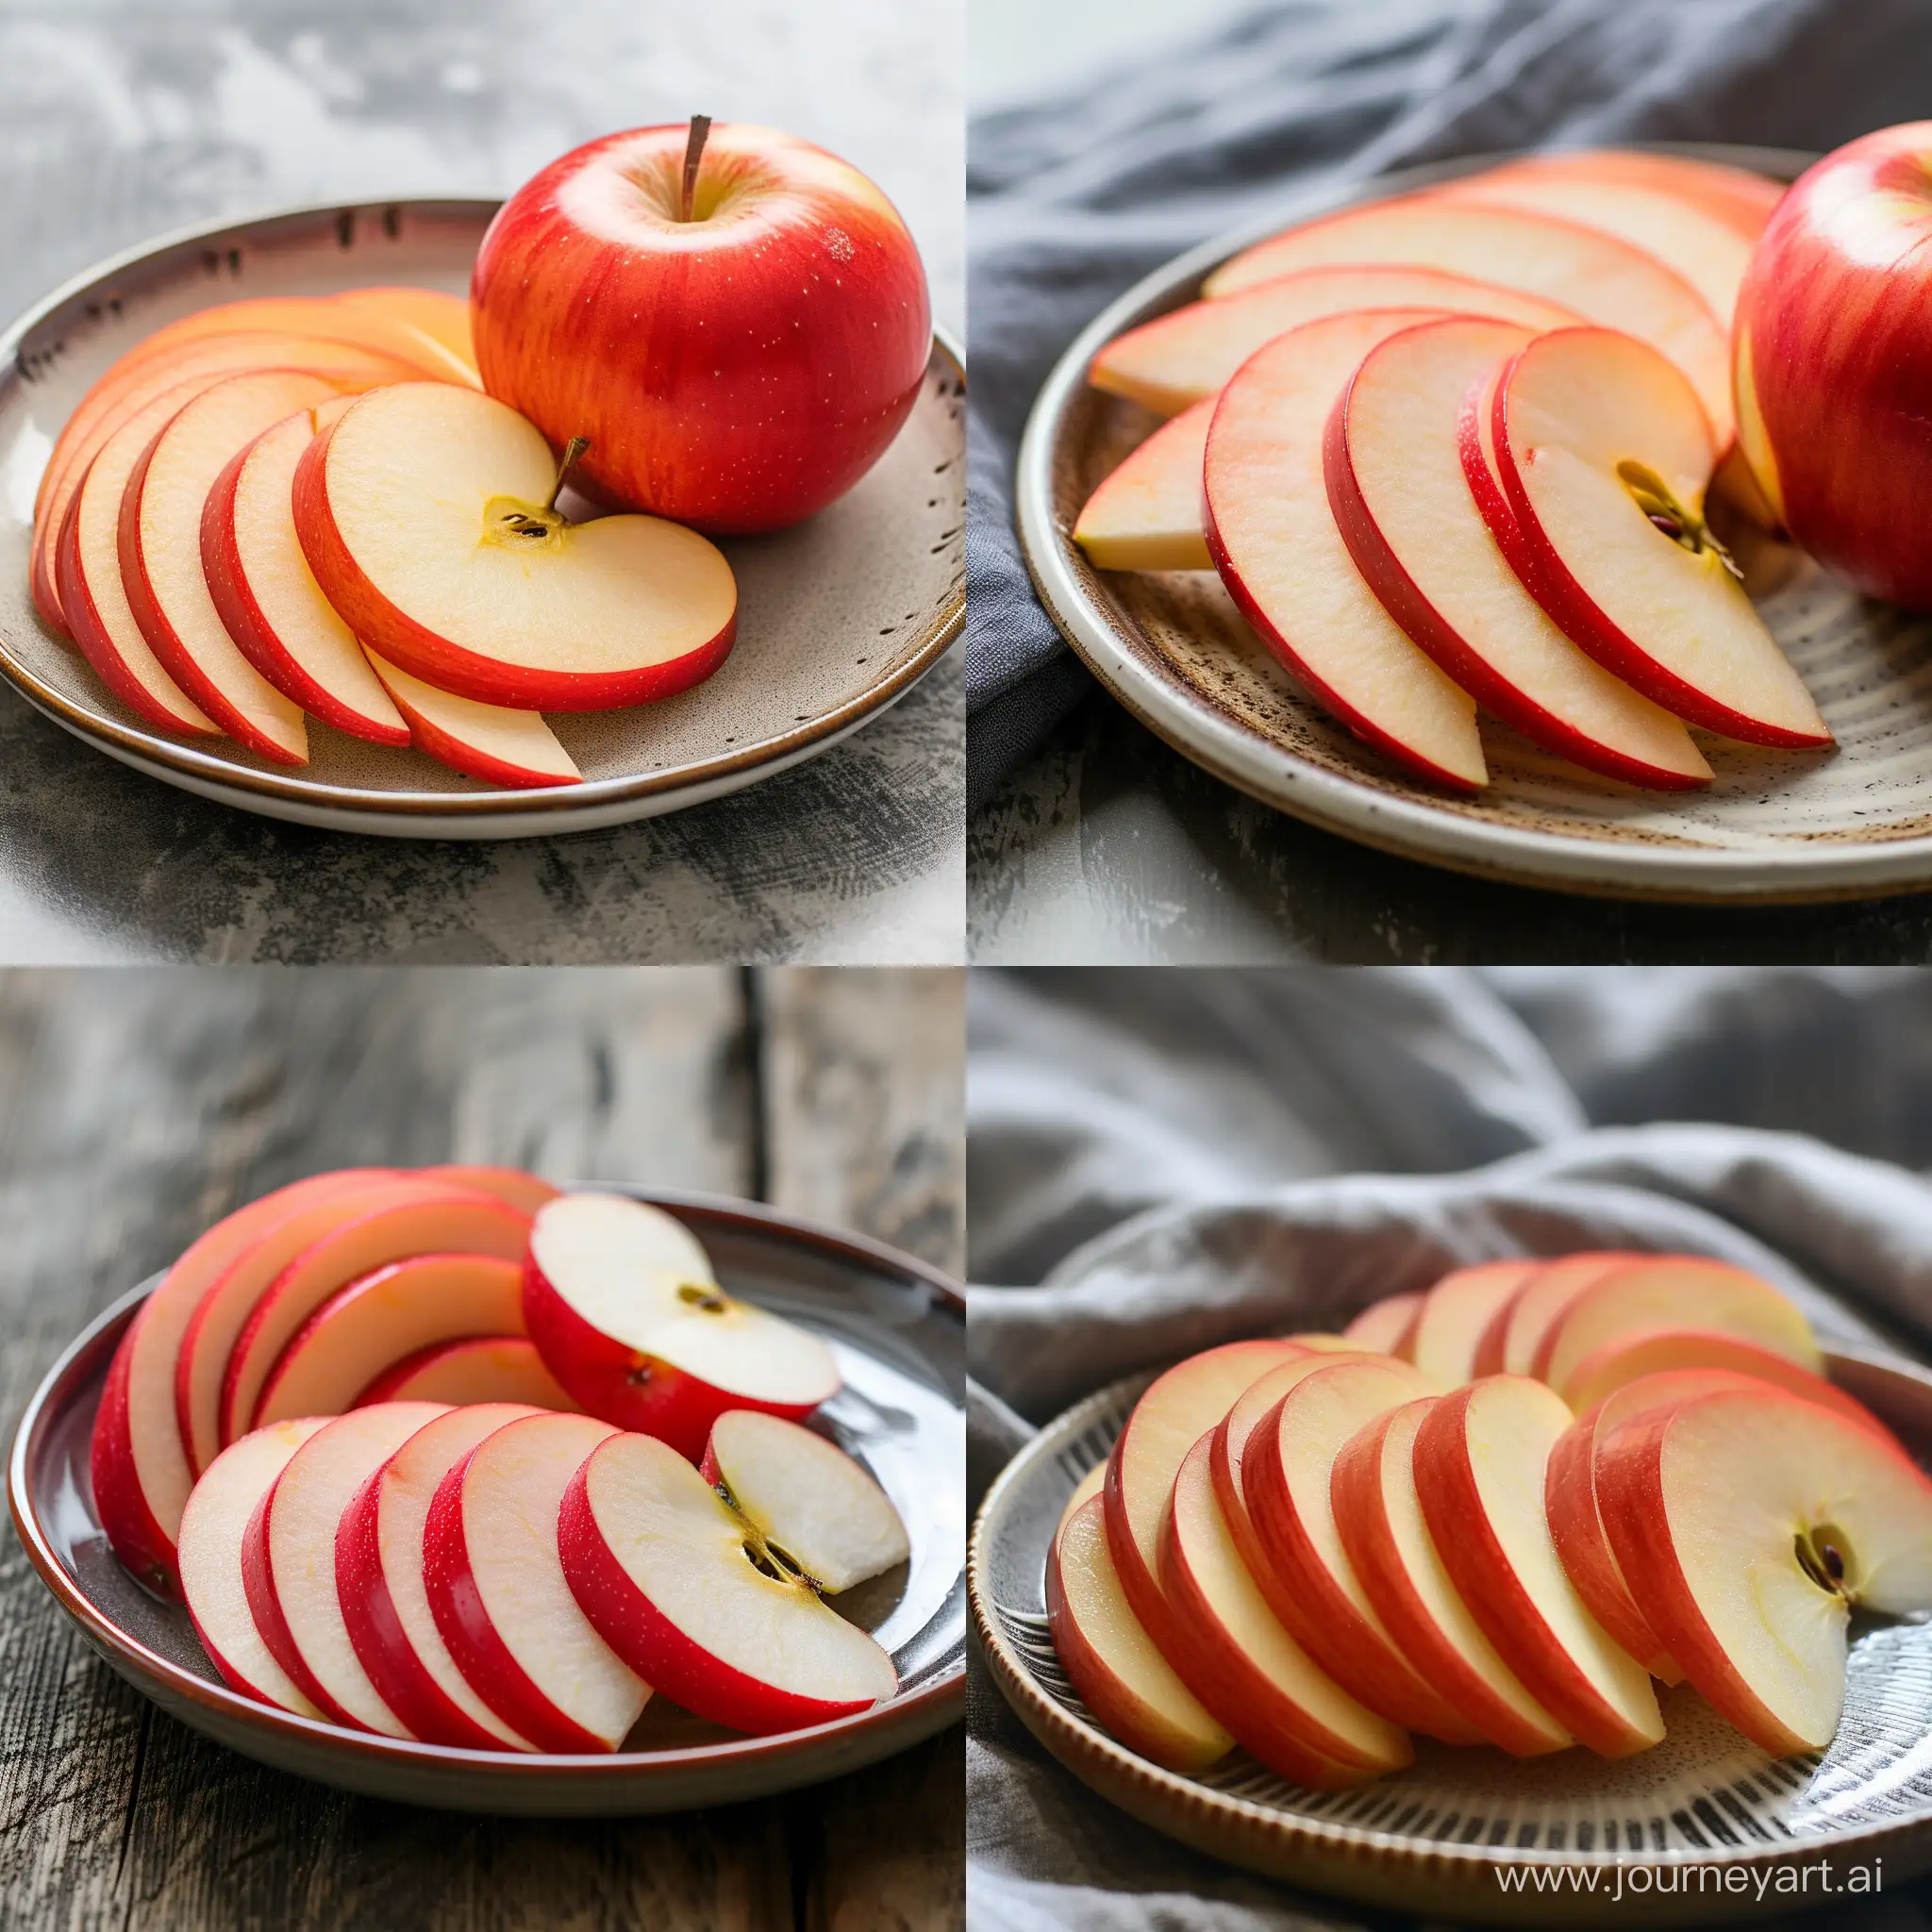 Fresh-Red-Apple-Slices-Arranged-Artfully-on-Plate-Side-View